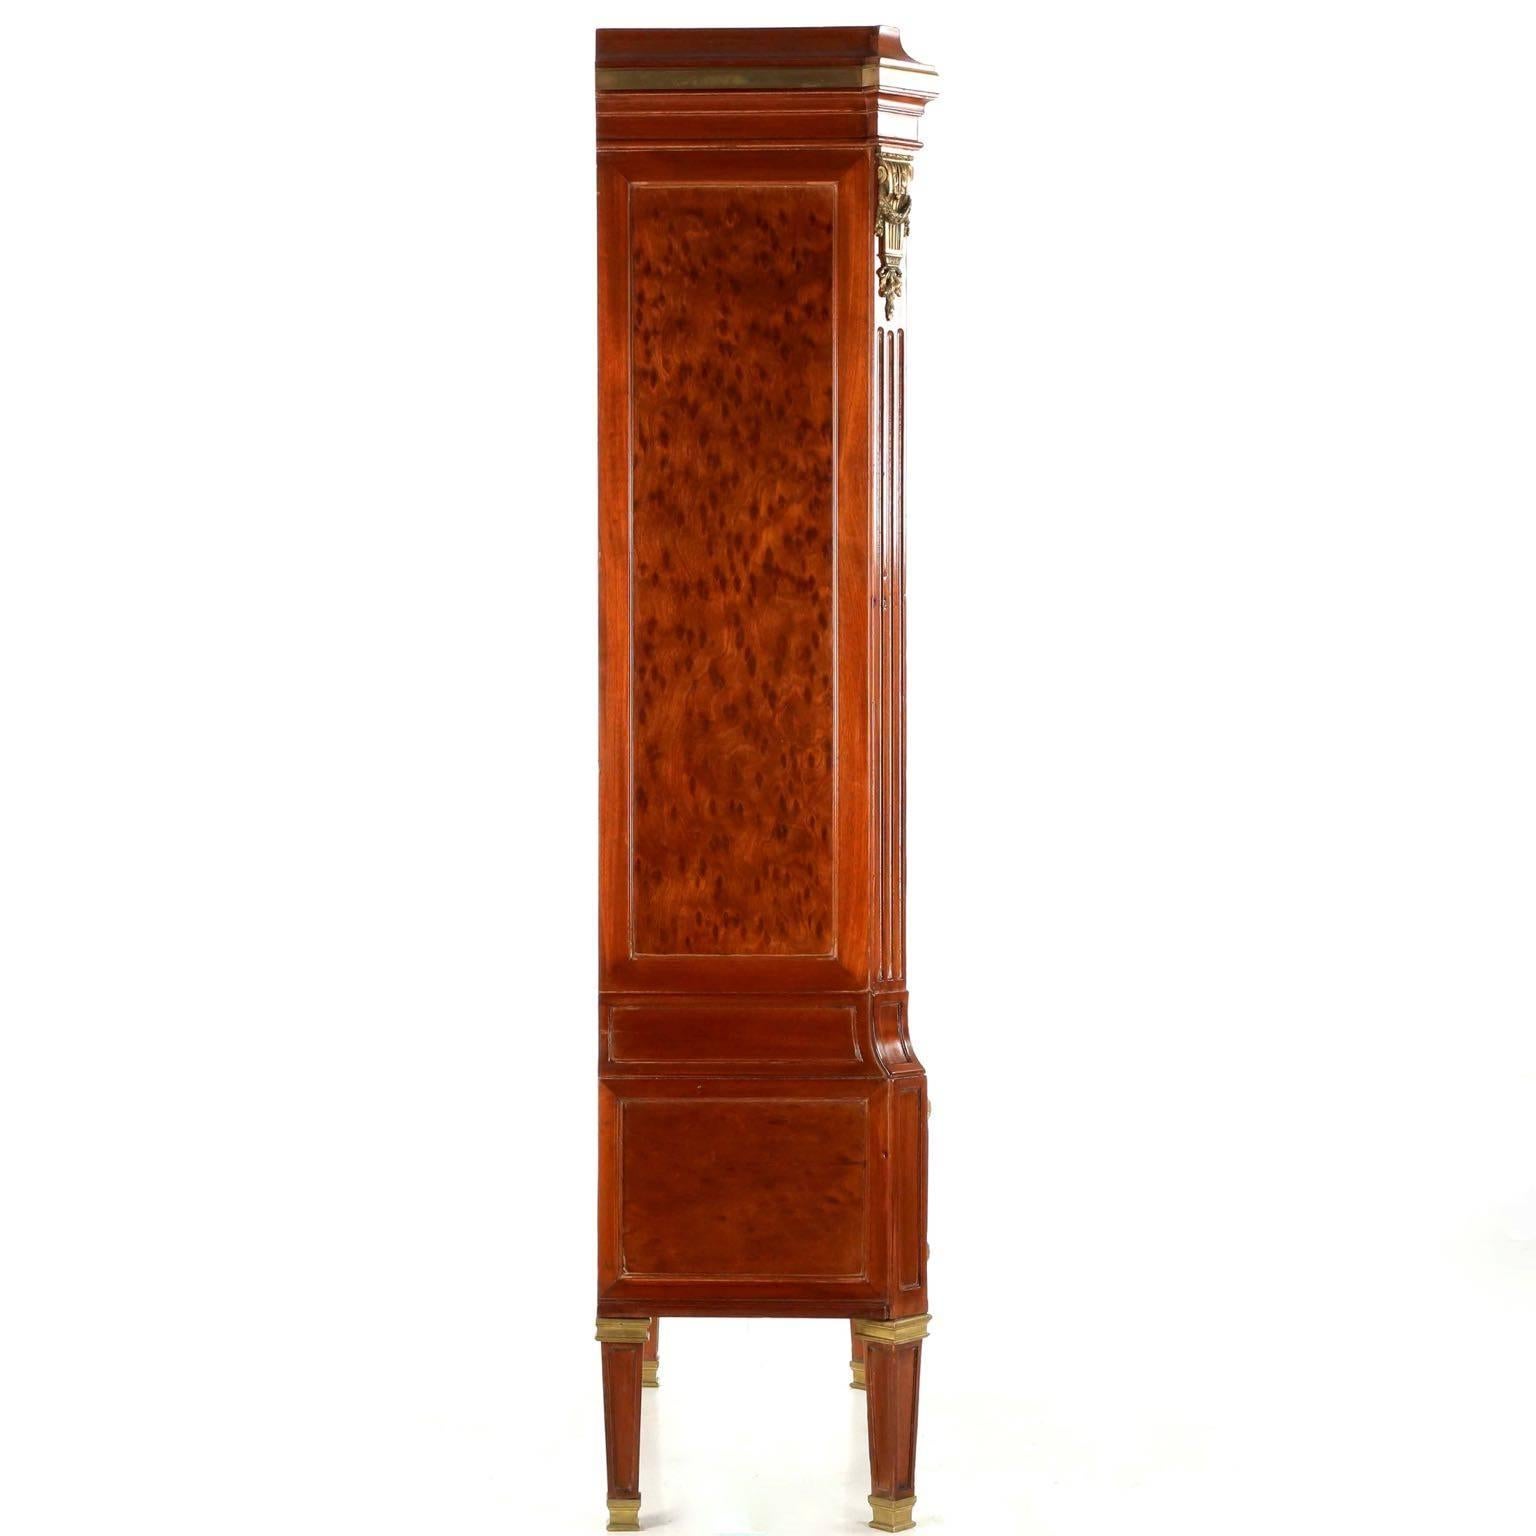 A most unusual and incredibly striking object, this tall case is designed in the Louis XVI taste with a distinct flair of the Neoclassical evident in its angular form. The facade is evenly distributed with perfect symmetry in the rectangular